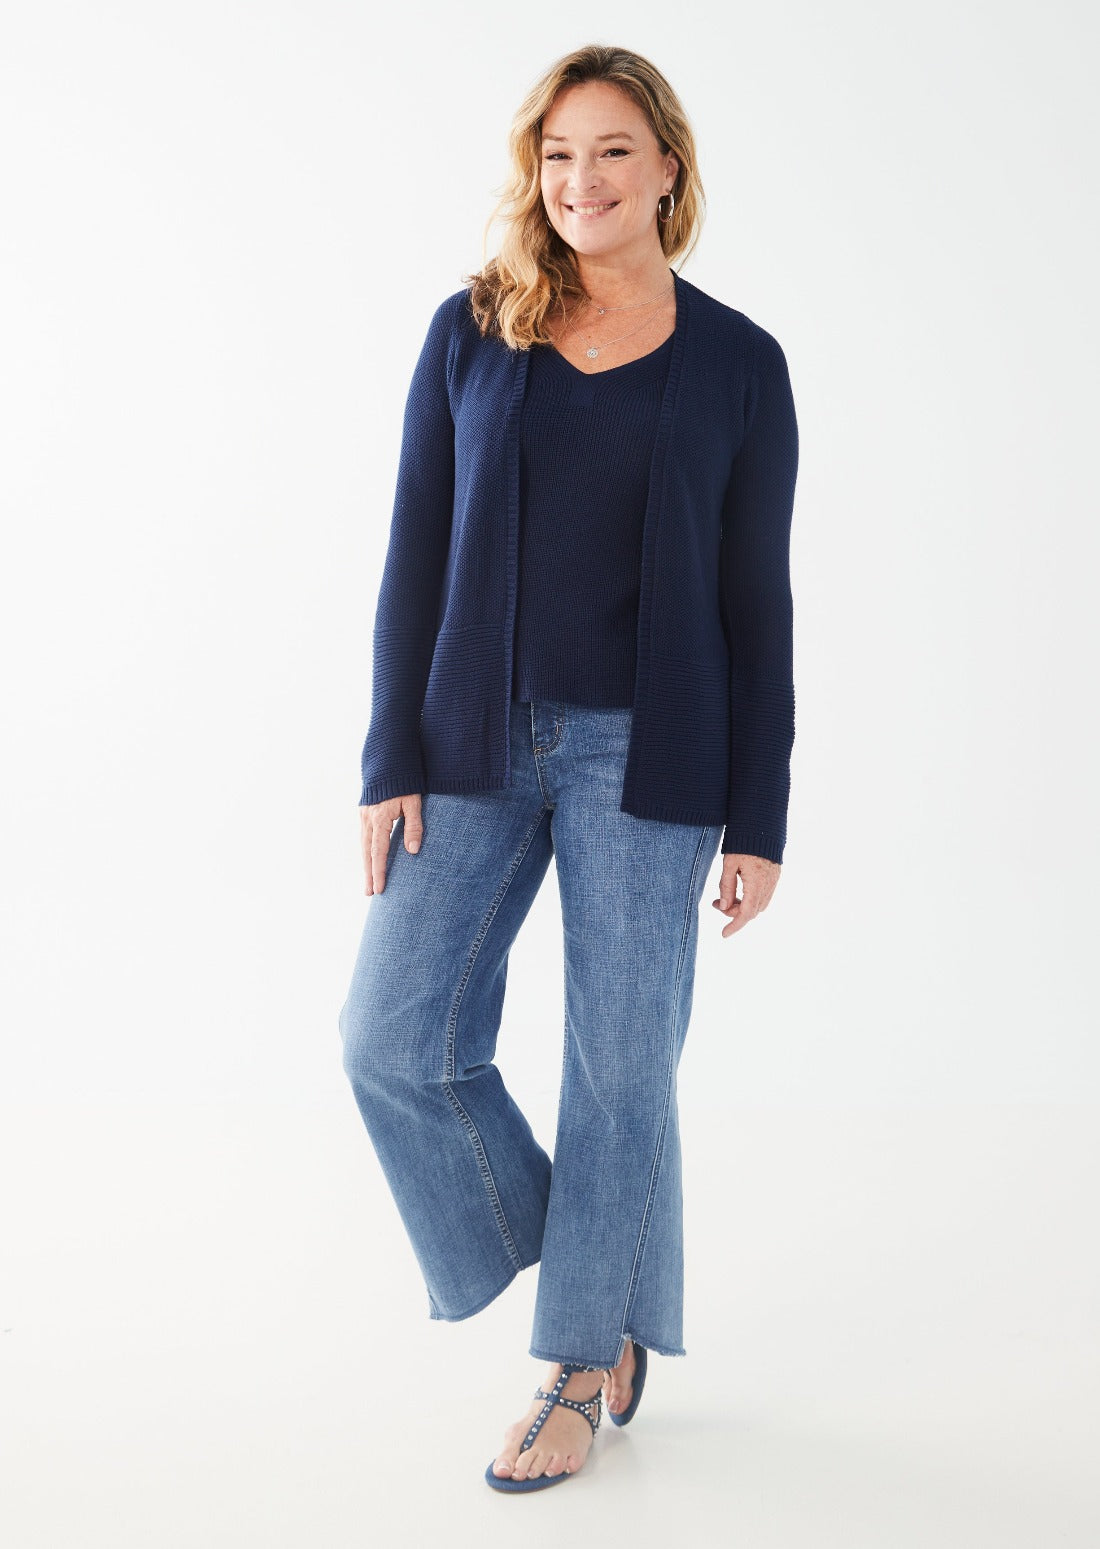 French Dressing Jeans - Textured Cardigan